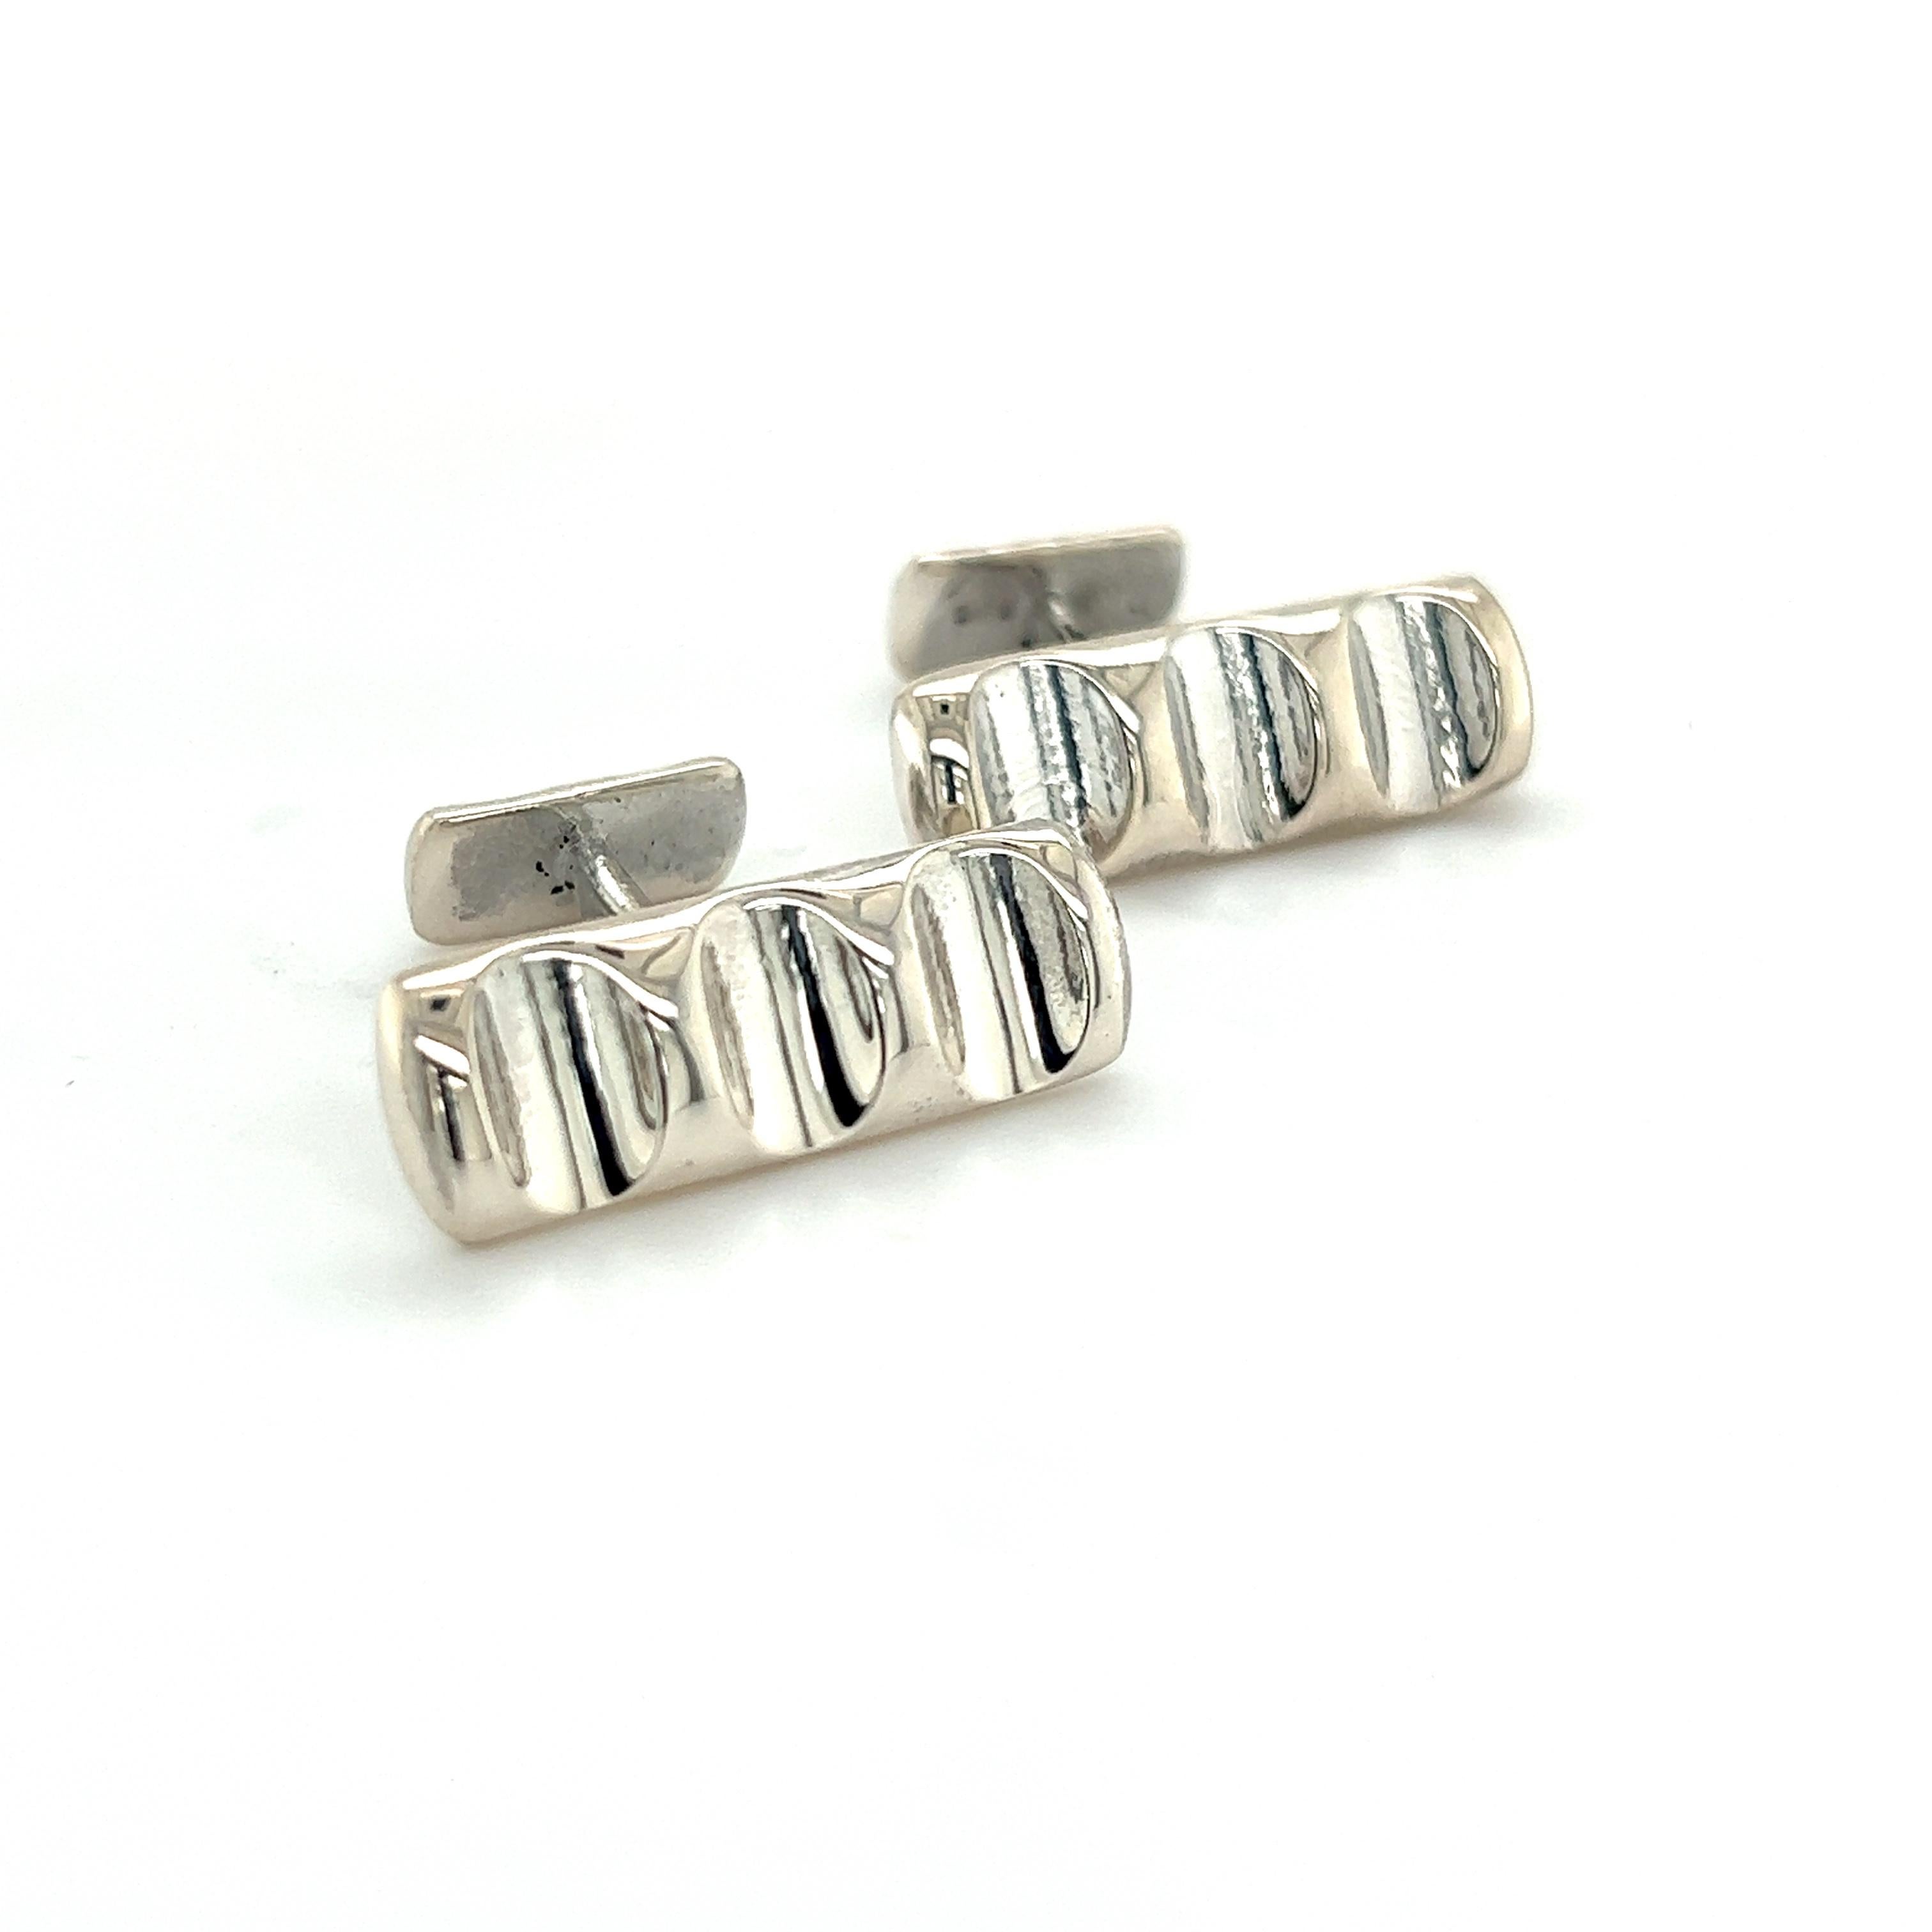 Tiffany & Co Estate Mens Cufflinks By Paloma Picasso Silver 1